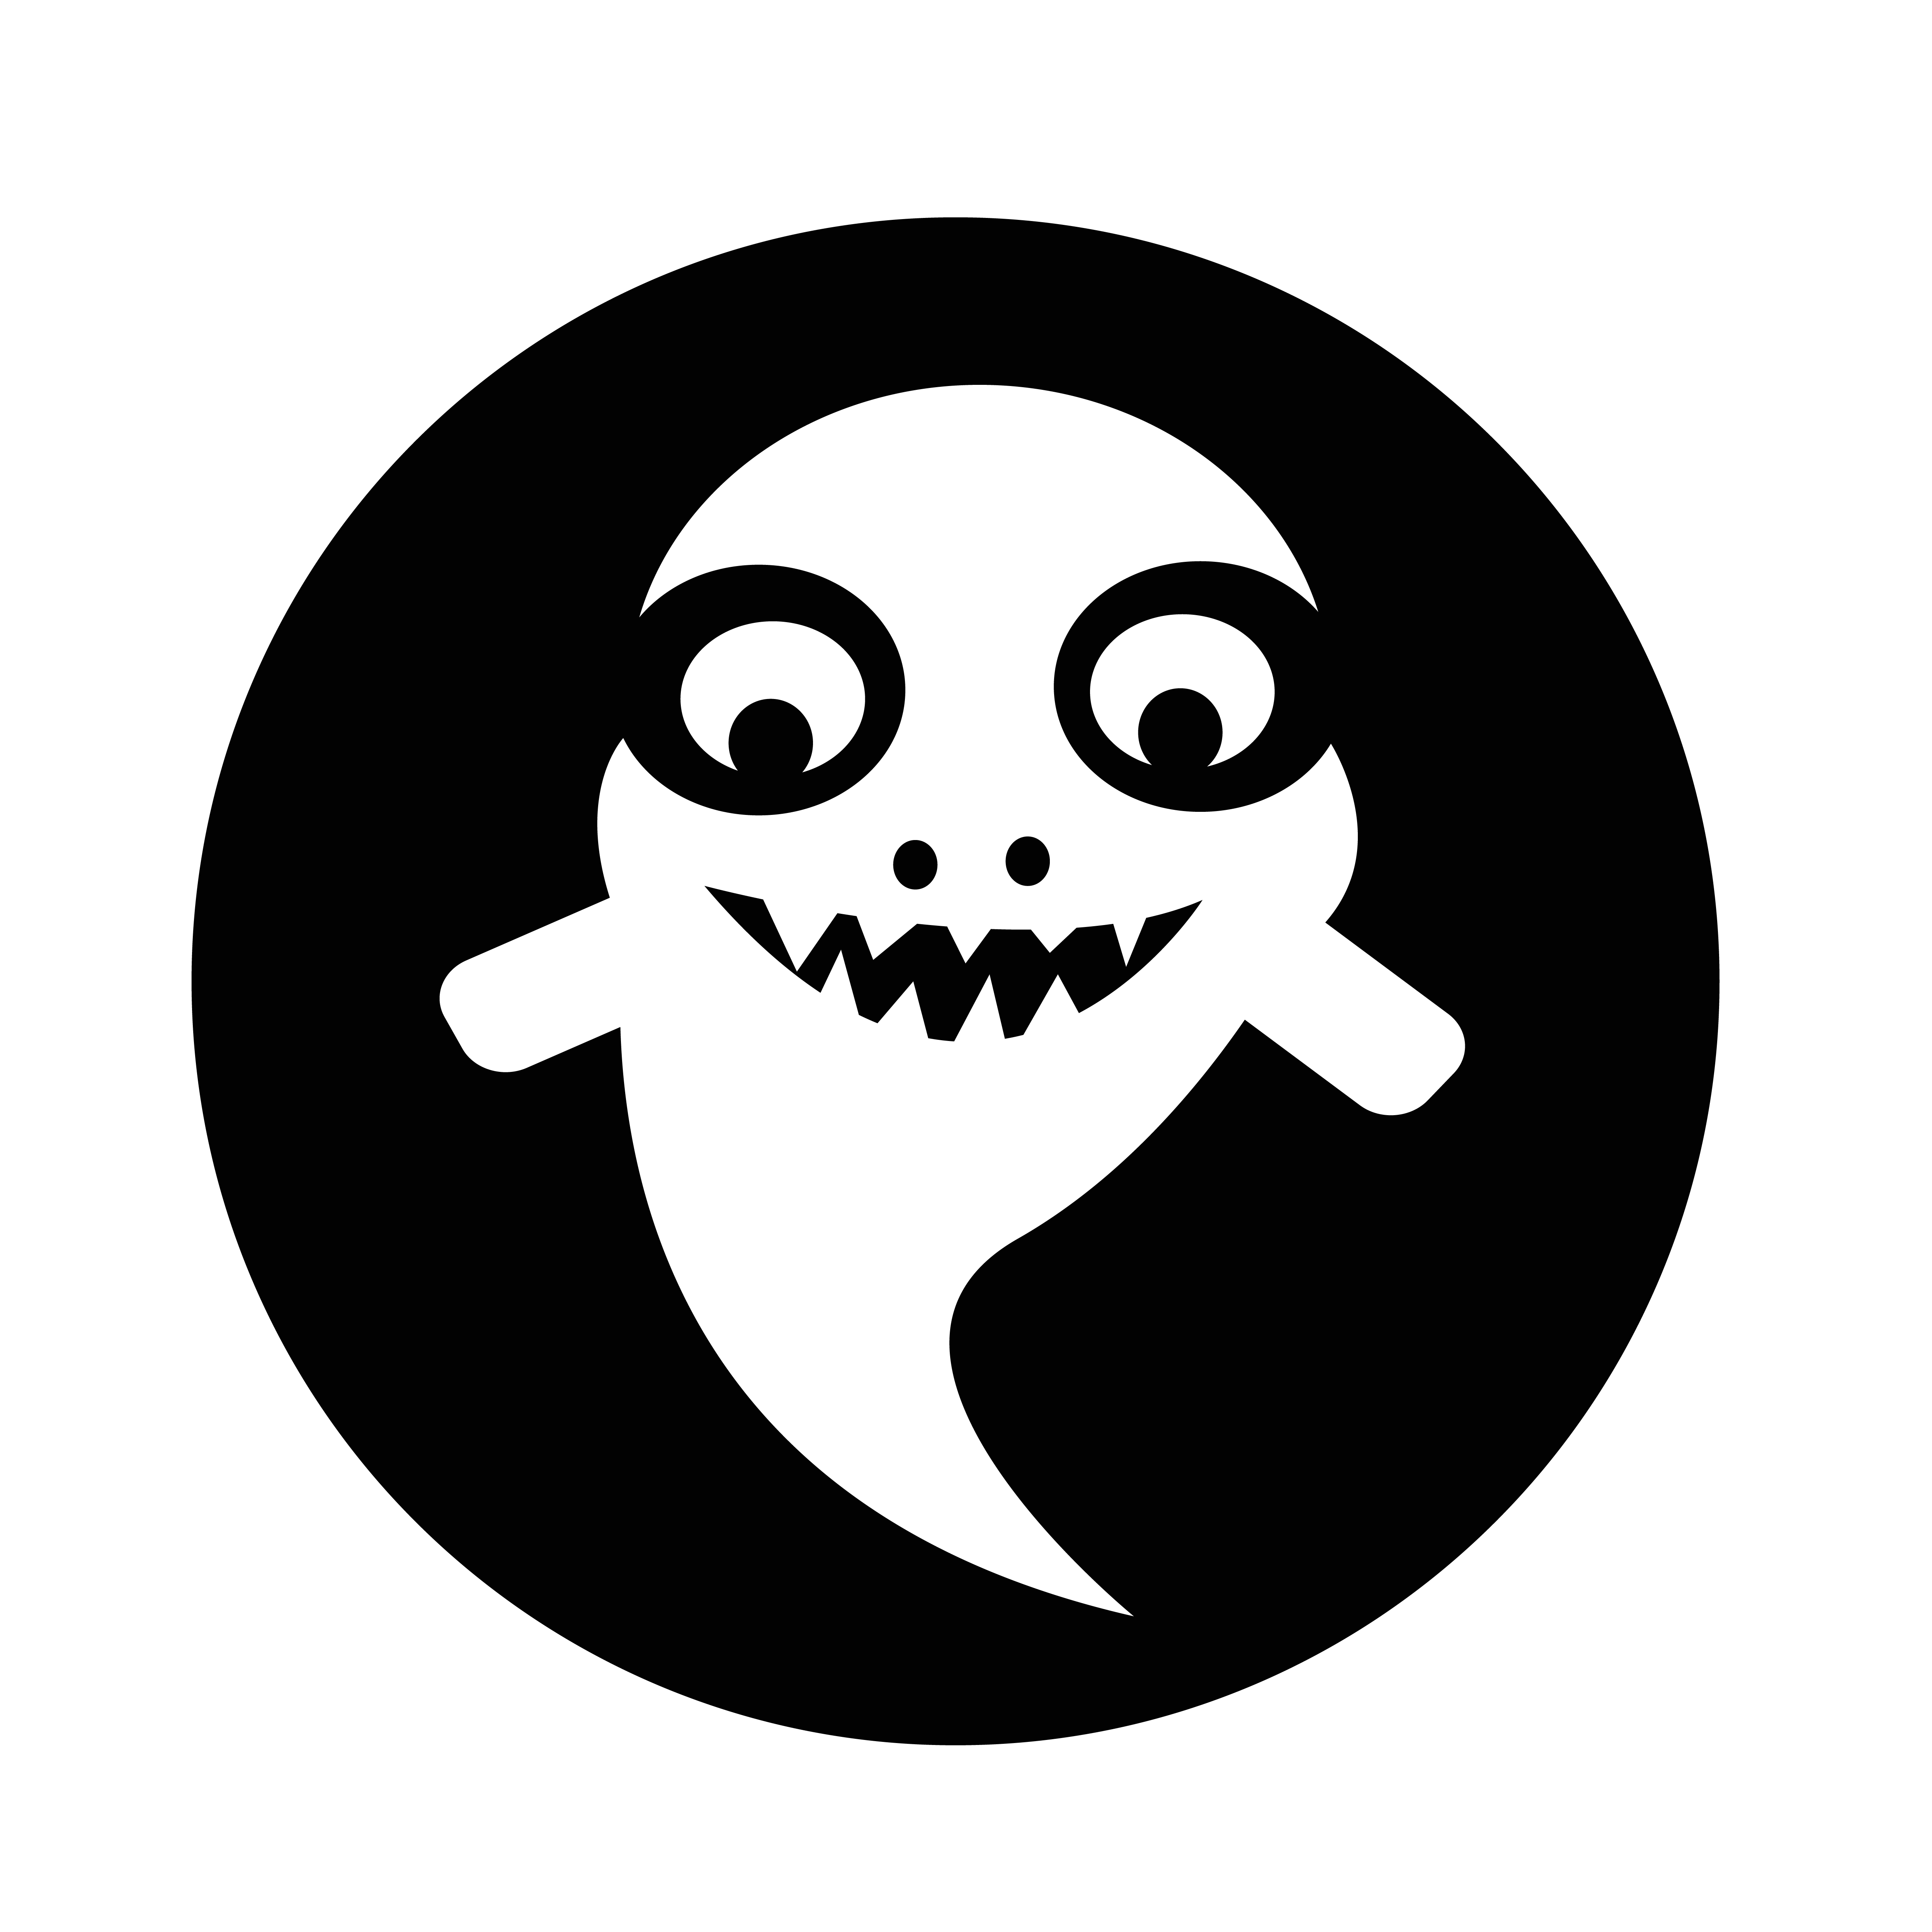 ghost Halloween icon - Download Free Vectors, Clipart ...